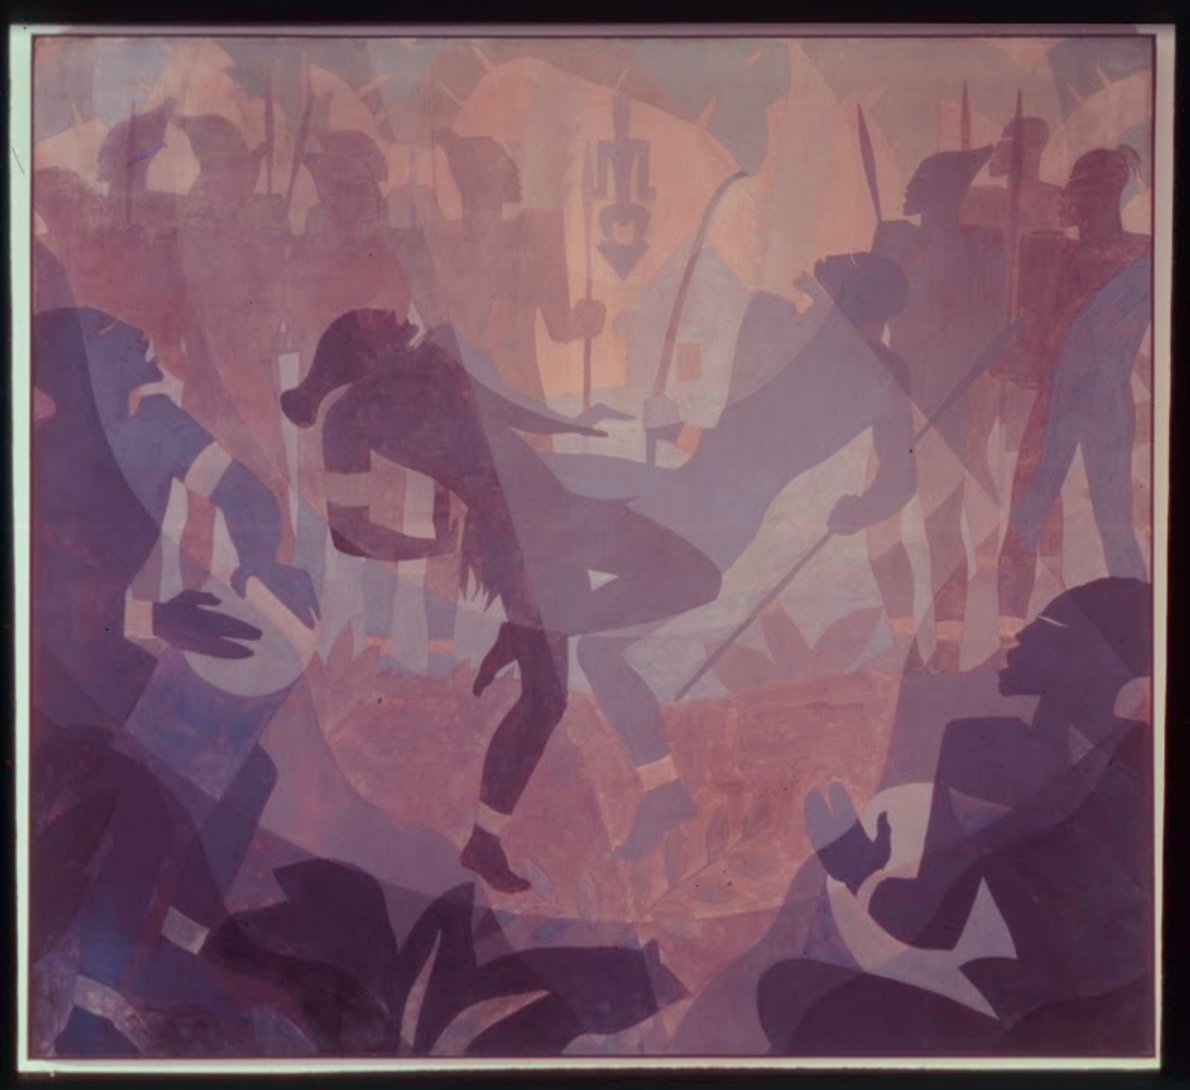 Aaron Douglas (b. 1899-1979) Aspects of Negro Life: The Negro in an African Setting